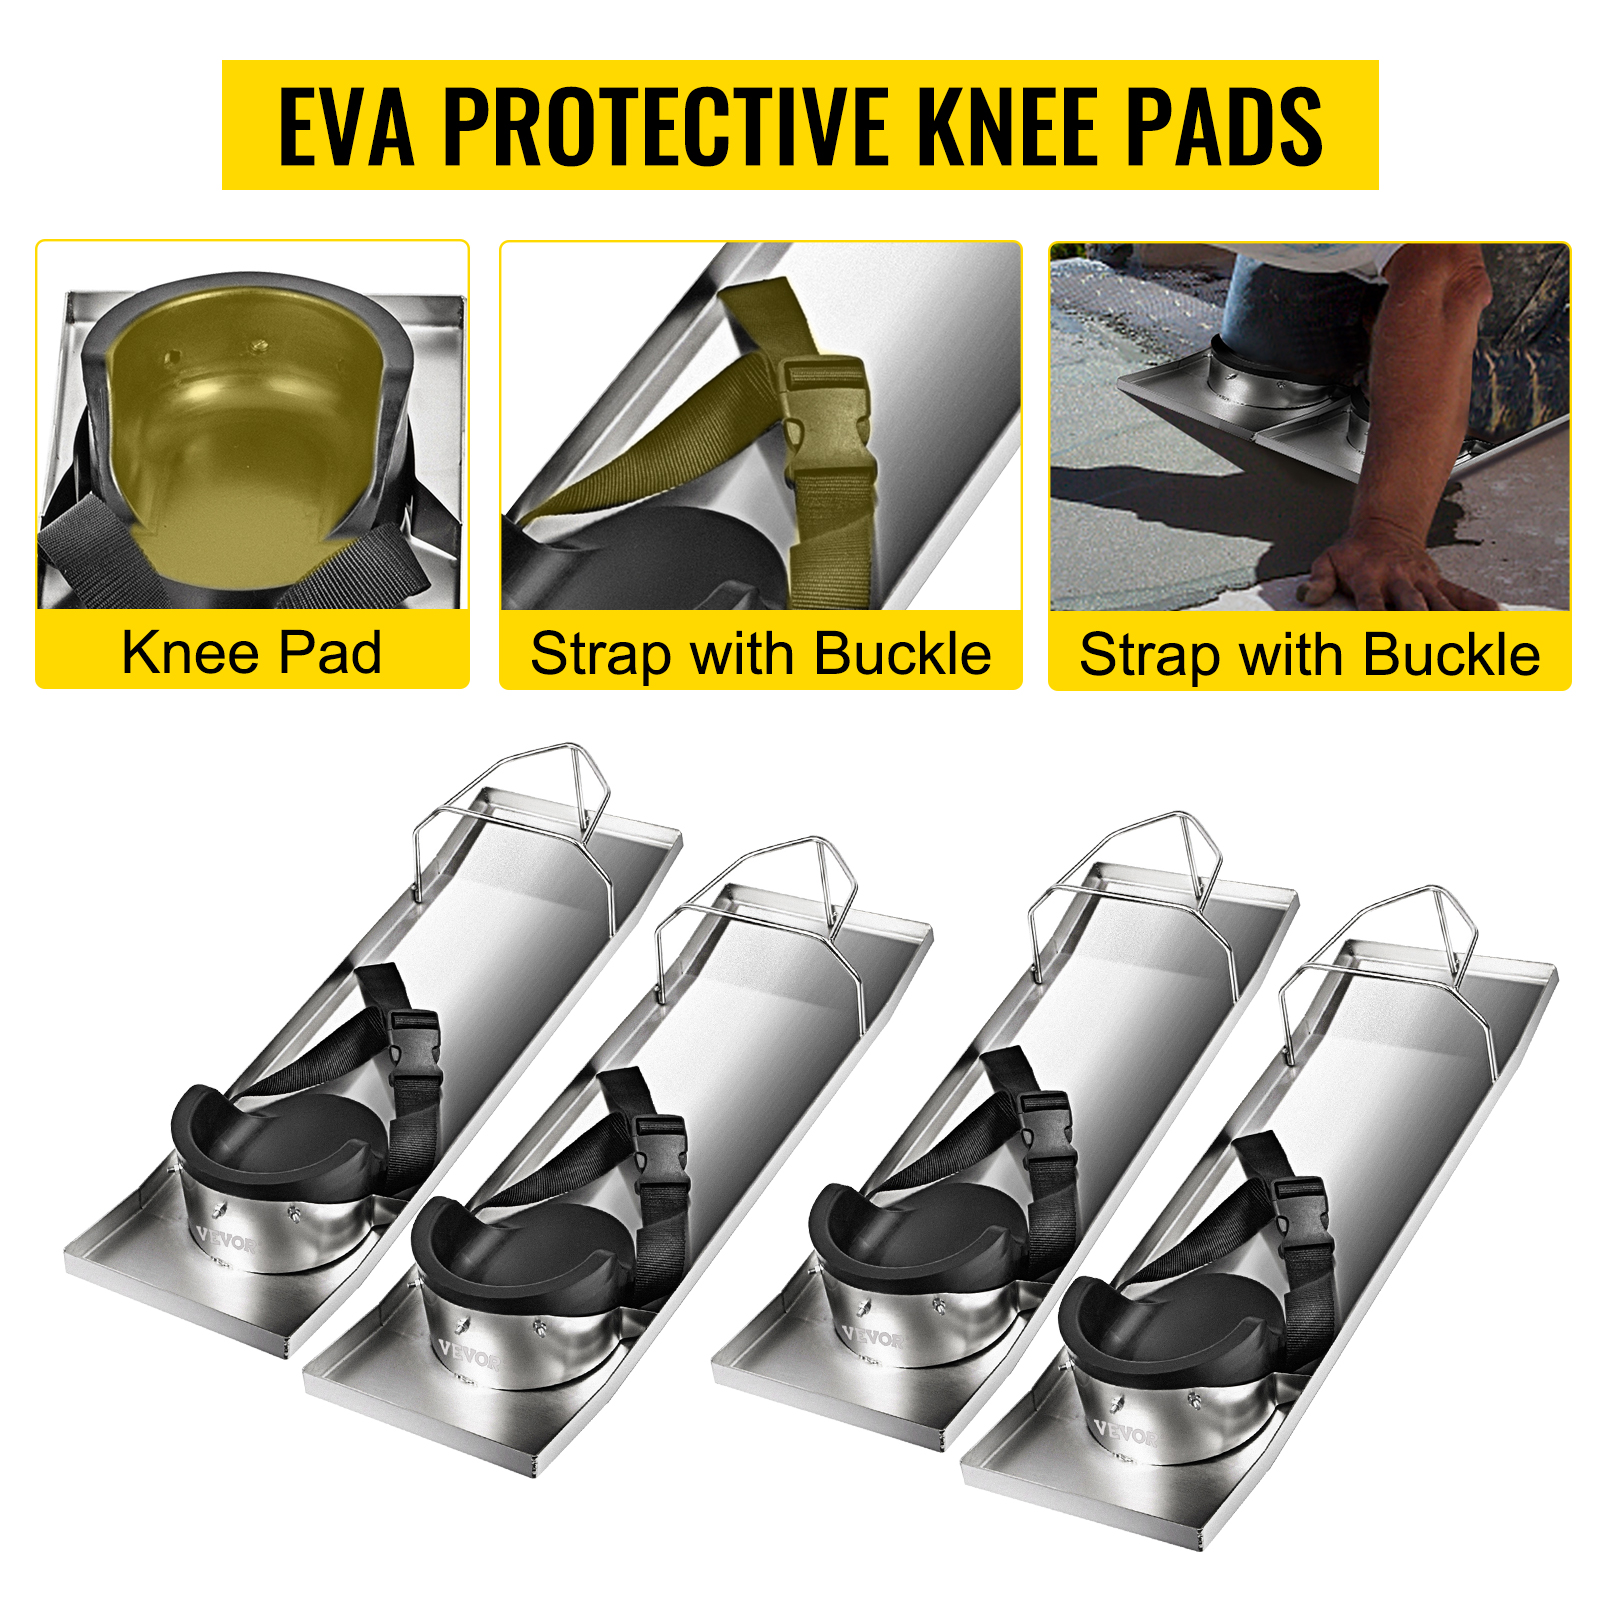 Benefits Of Using Concrete Knee Boards